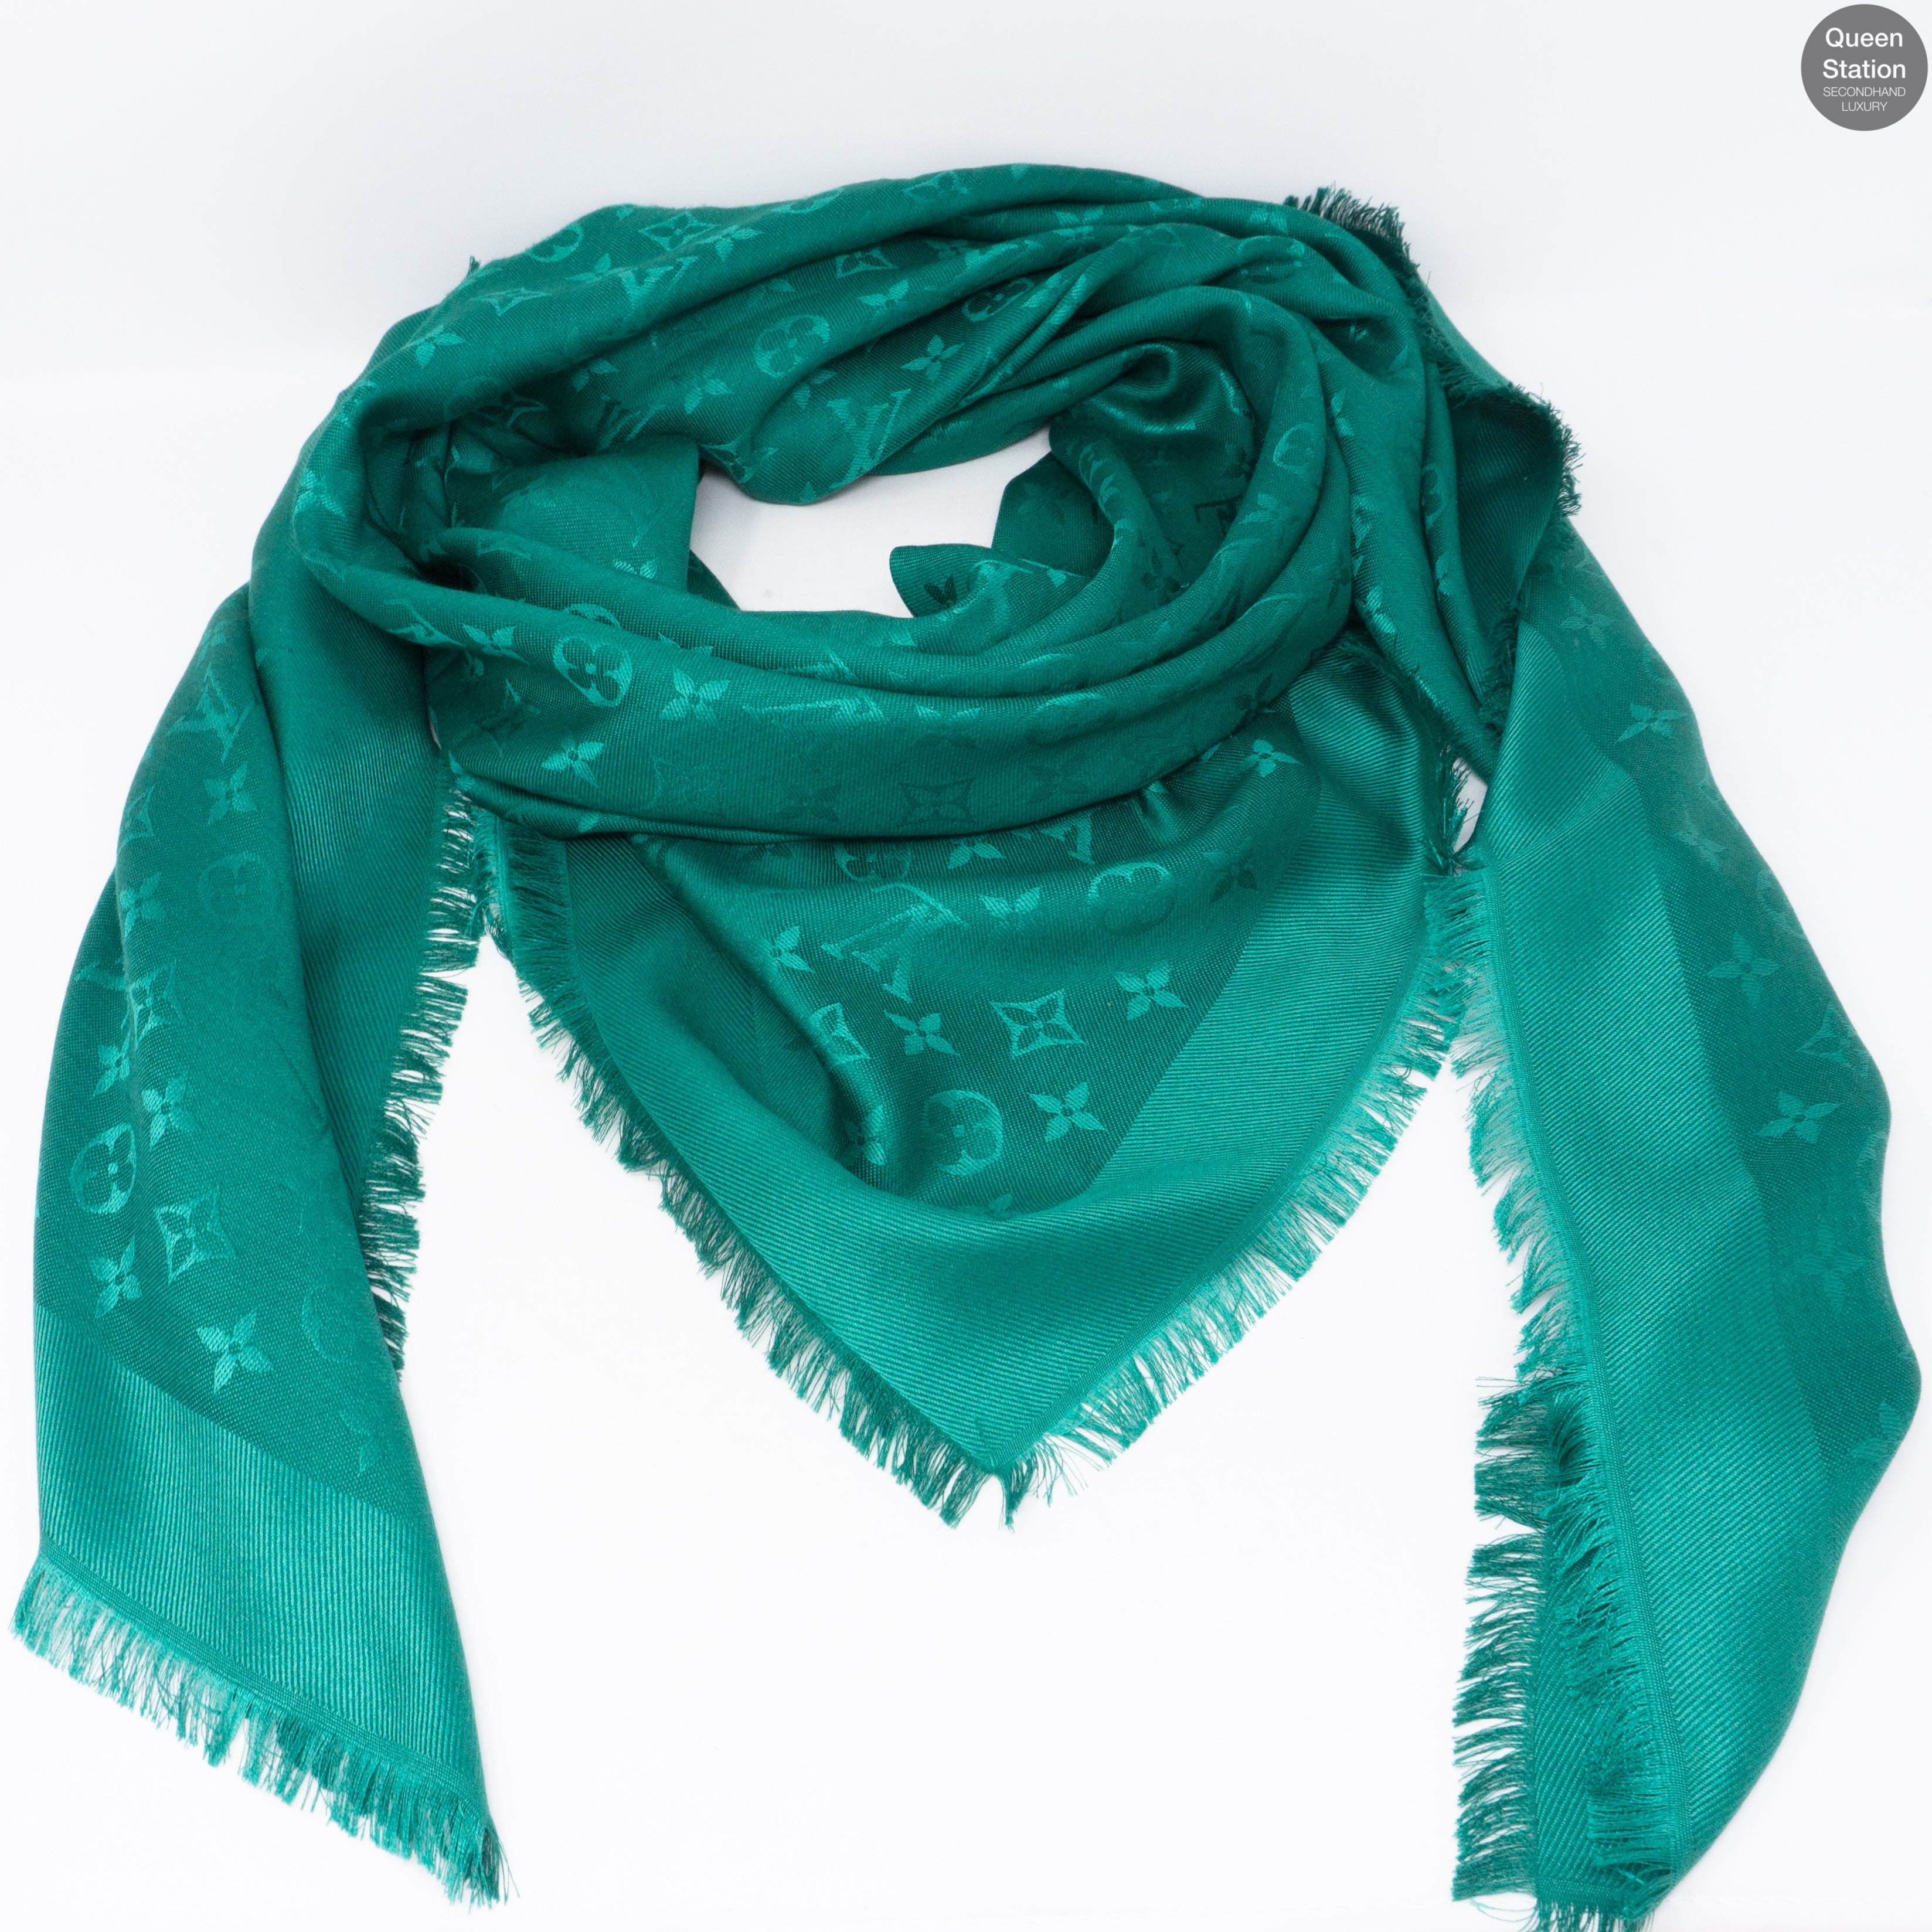 Louis Vuitton Limited Edition 'Infinity' Stole Chale Scarf in Ombre Neon  Green 100% Wool - SOLD